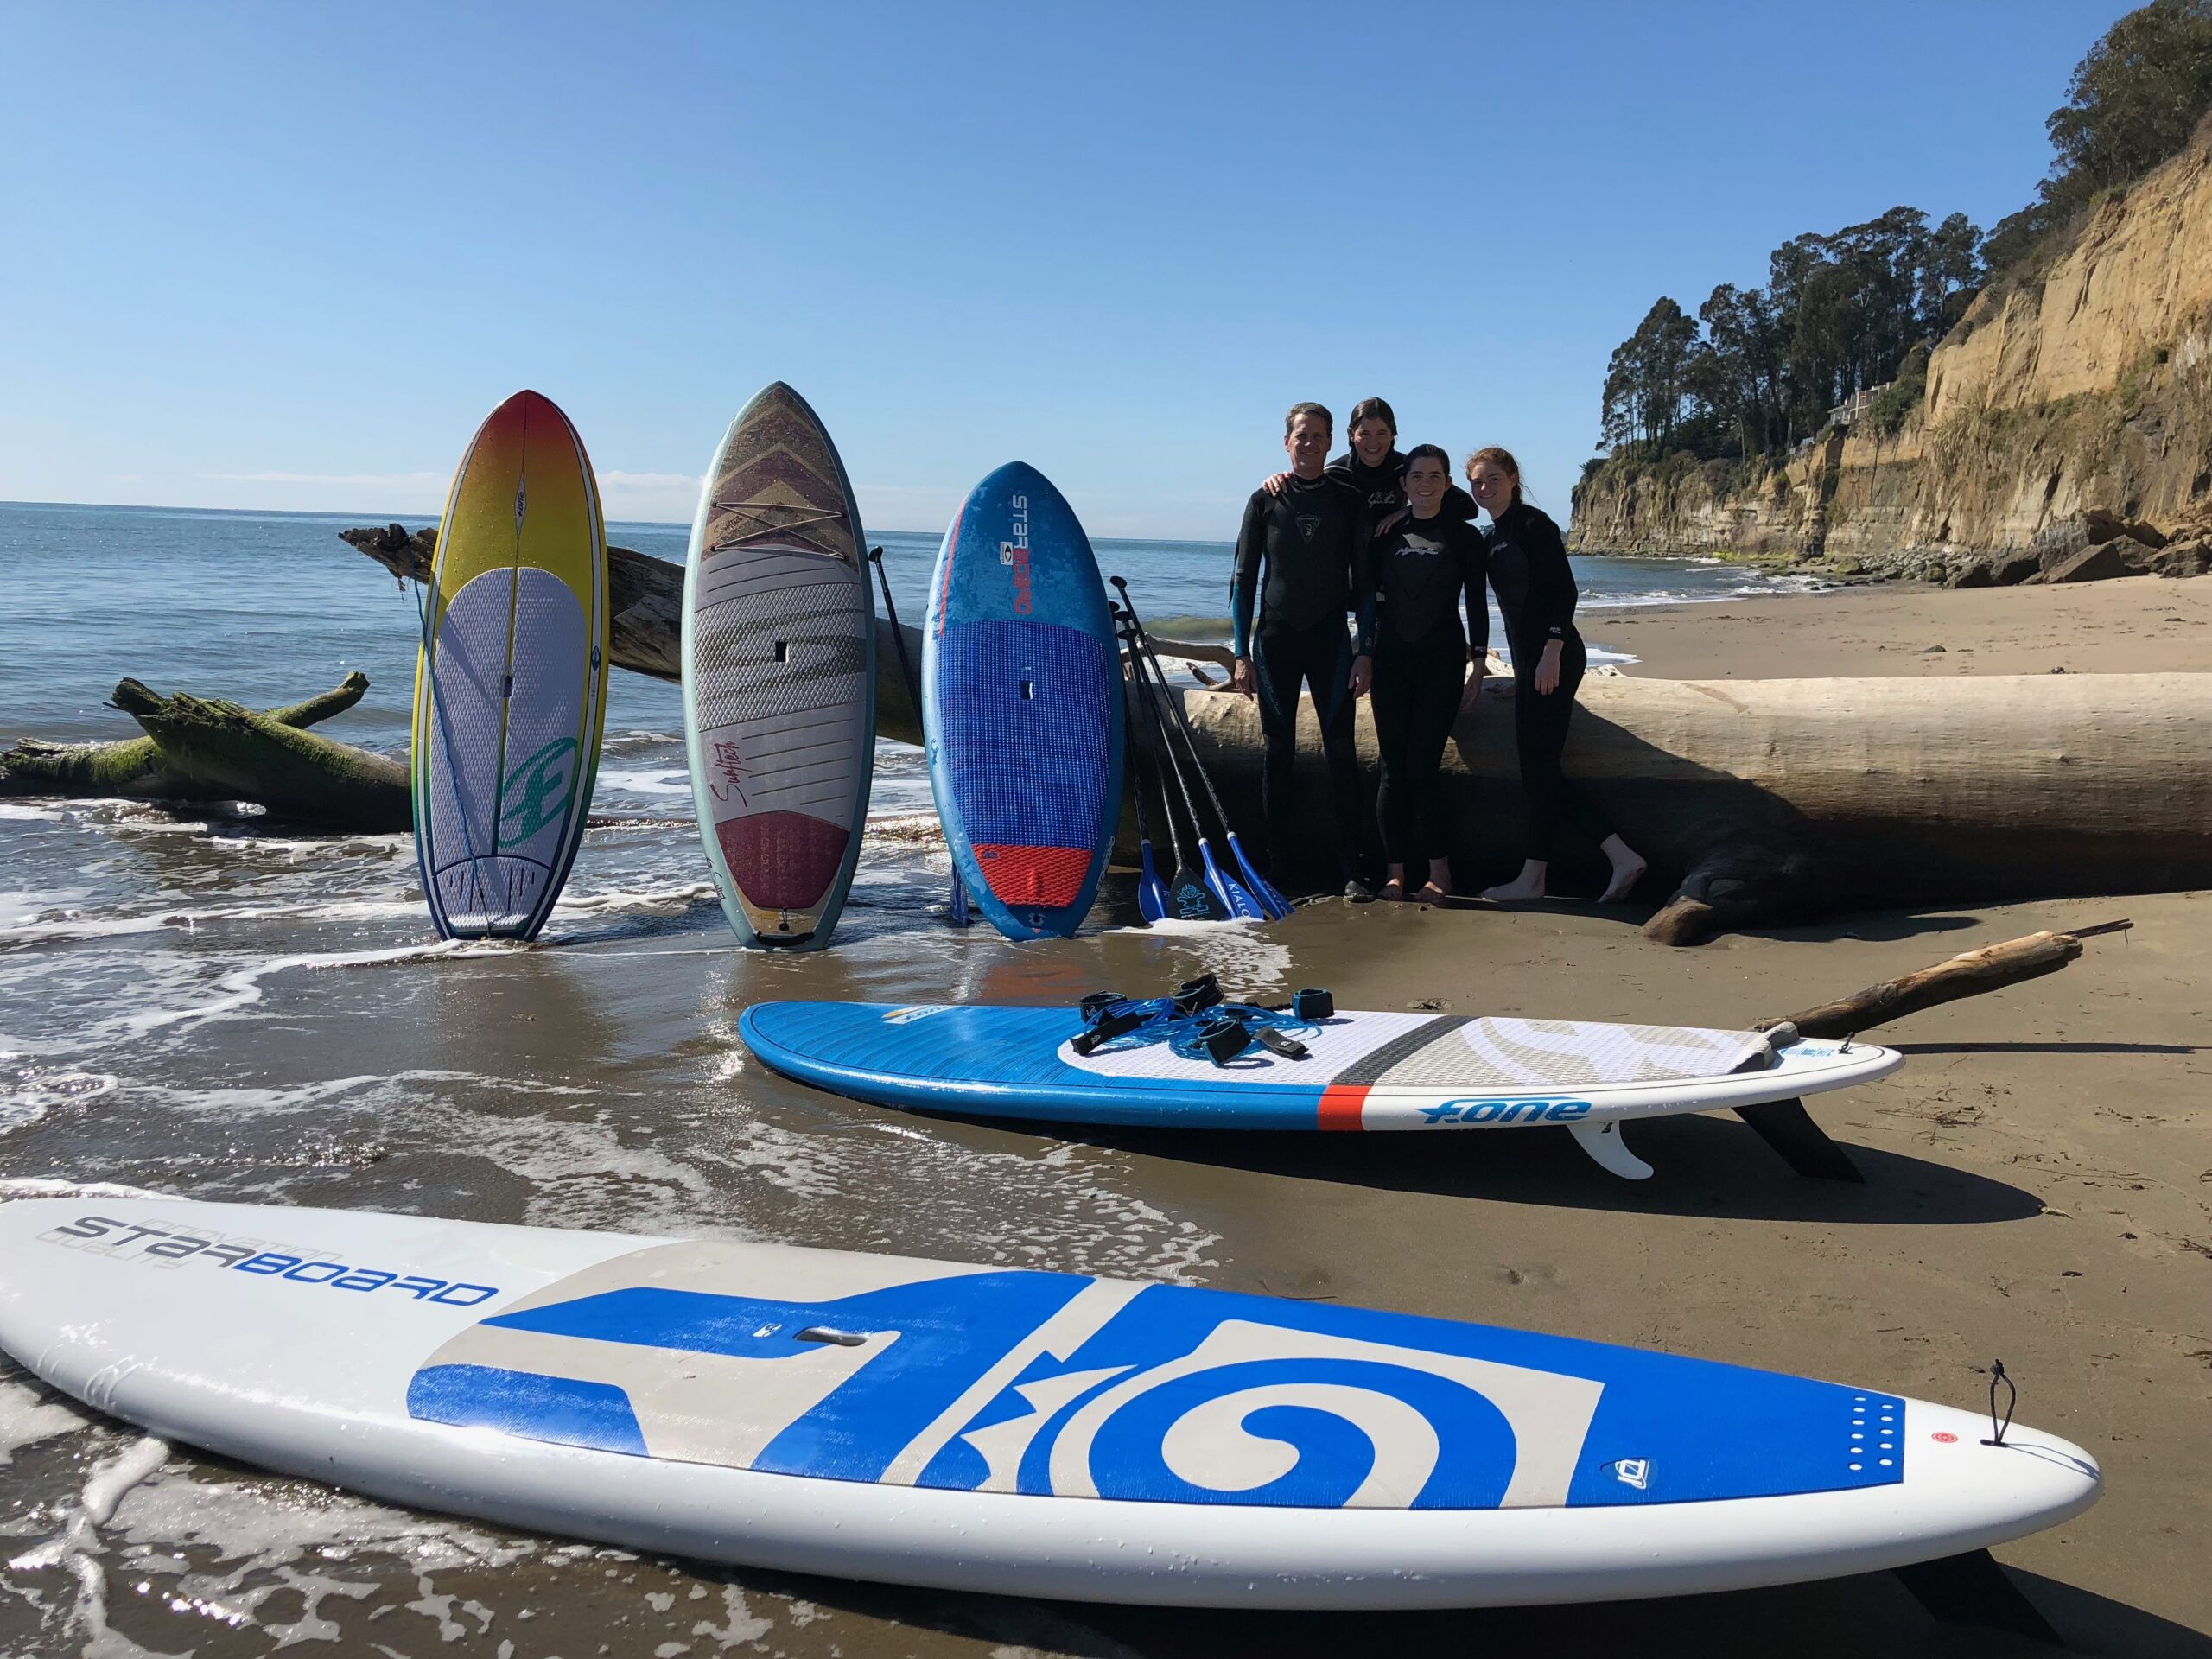 Covewater Paddle Surf – Dedicated Standup Paddle Boarding Shop